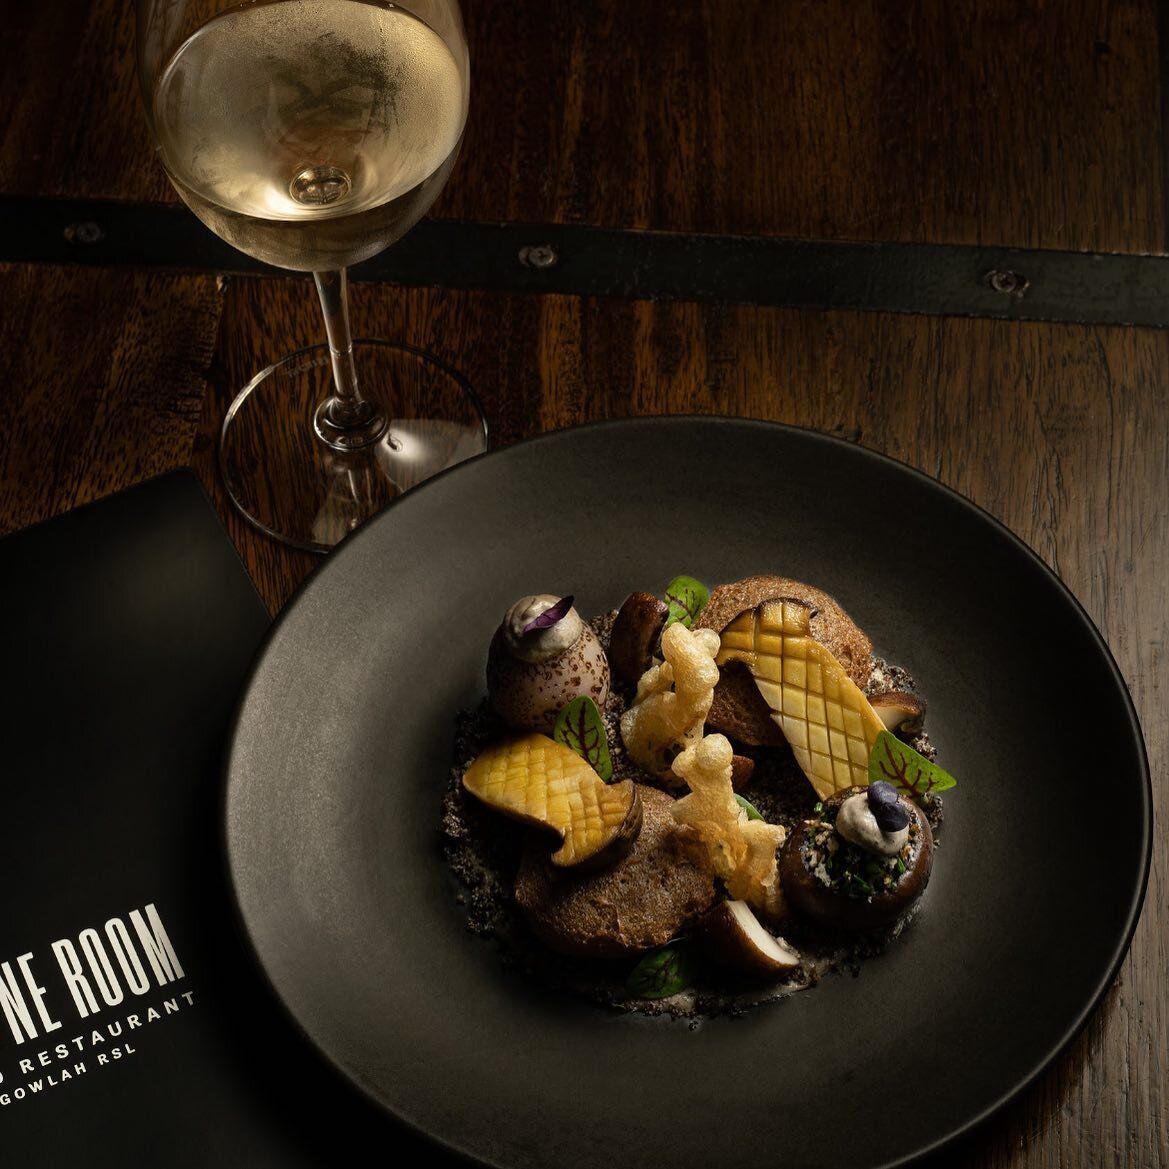 The new menu isn&rsquo;t the only thing the chefs have been cooking up lately - The Wine Room special this month, Textures of Mushroom, is something you don&rsquo;t want to miss!  Reserve a table via our website, over the phone, or in person at recep